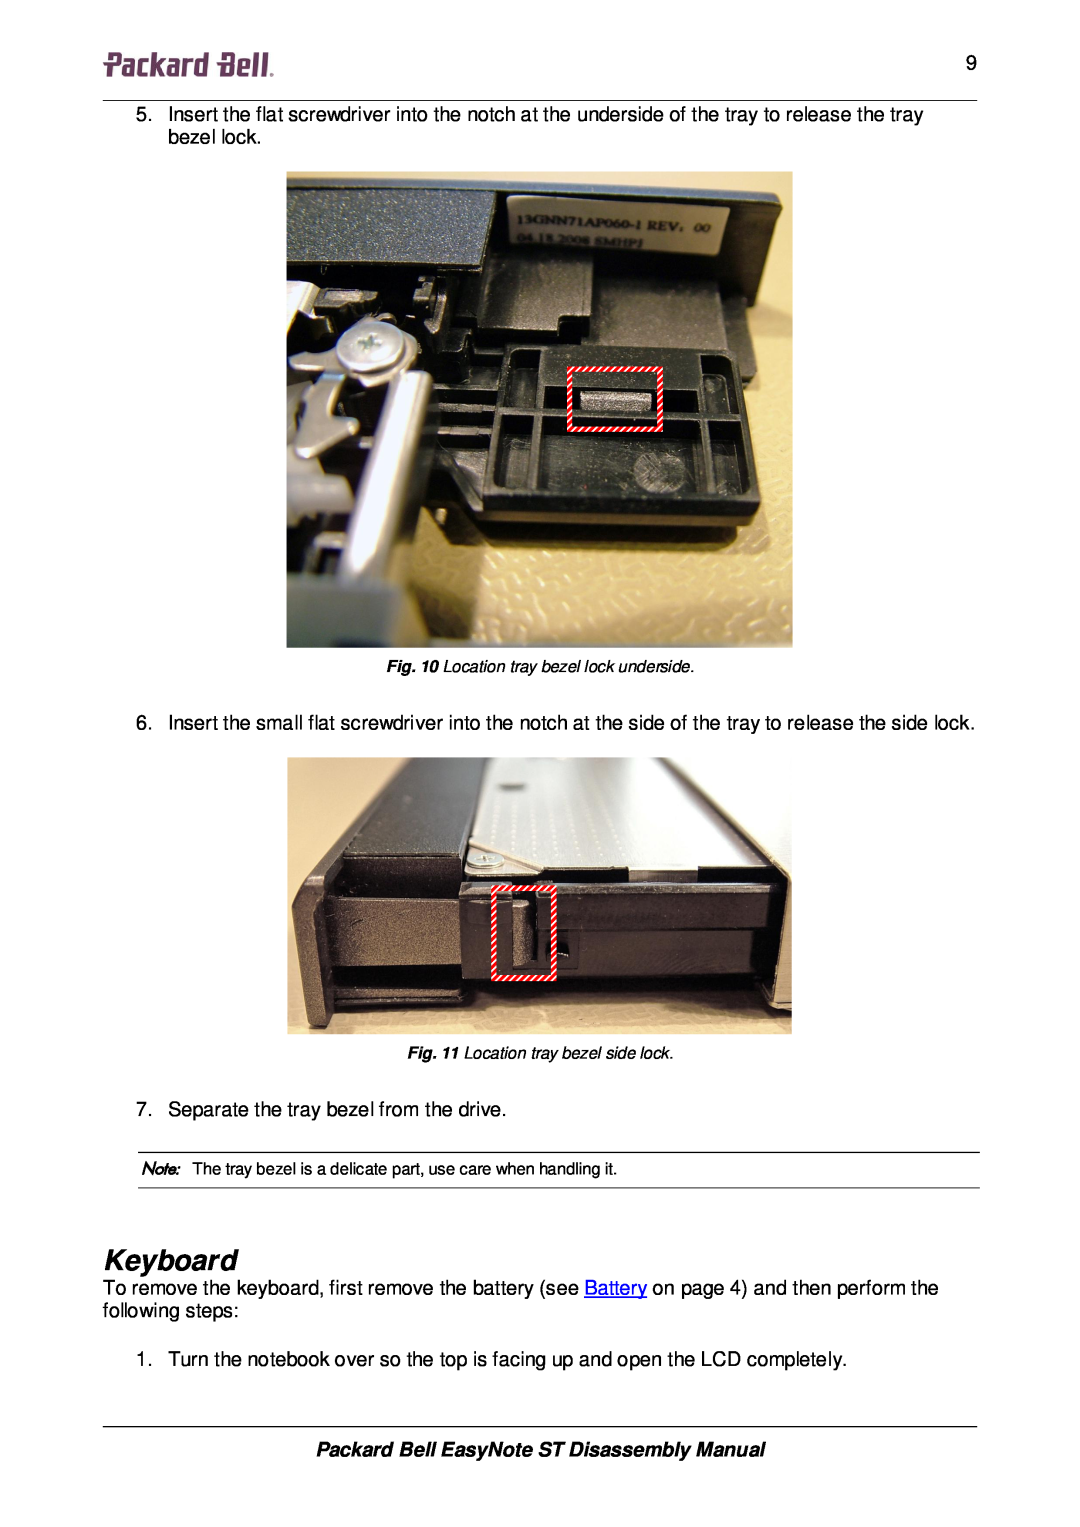 Packard Bell manual Keyboard, Packard Bell EasyNote ST Disassembly Manual 